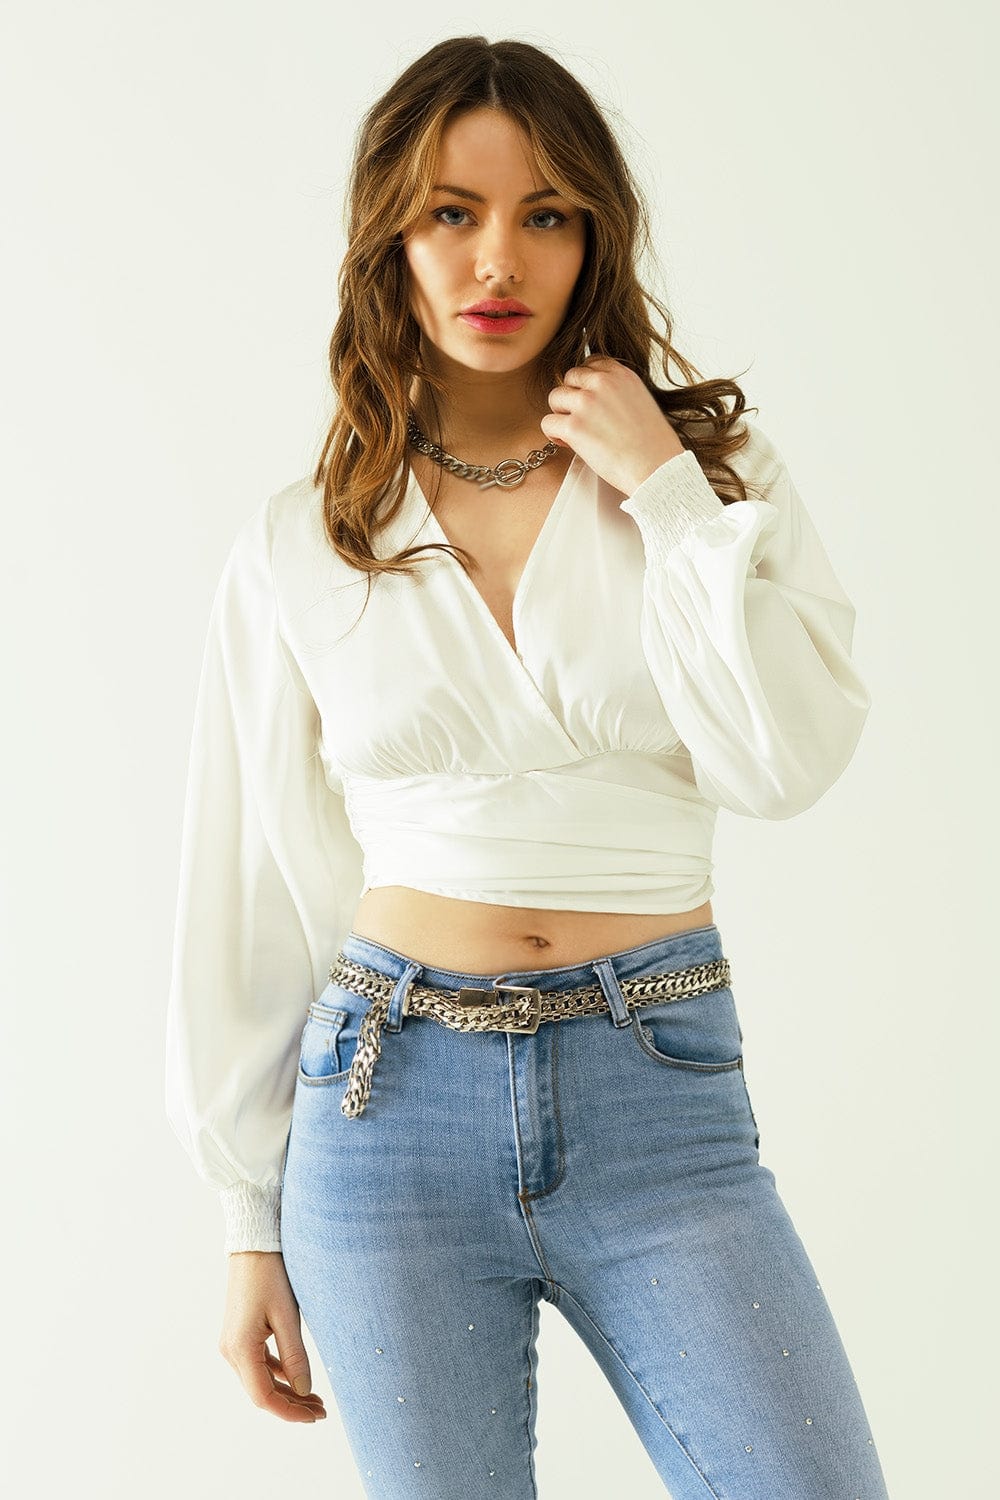 Q2 Women's Blouse Satin Wrap Crop Top Fitted At The Waist In White